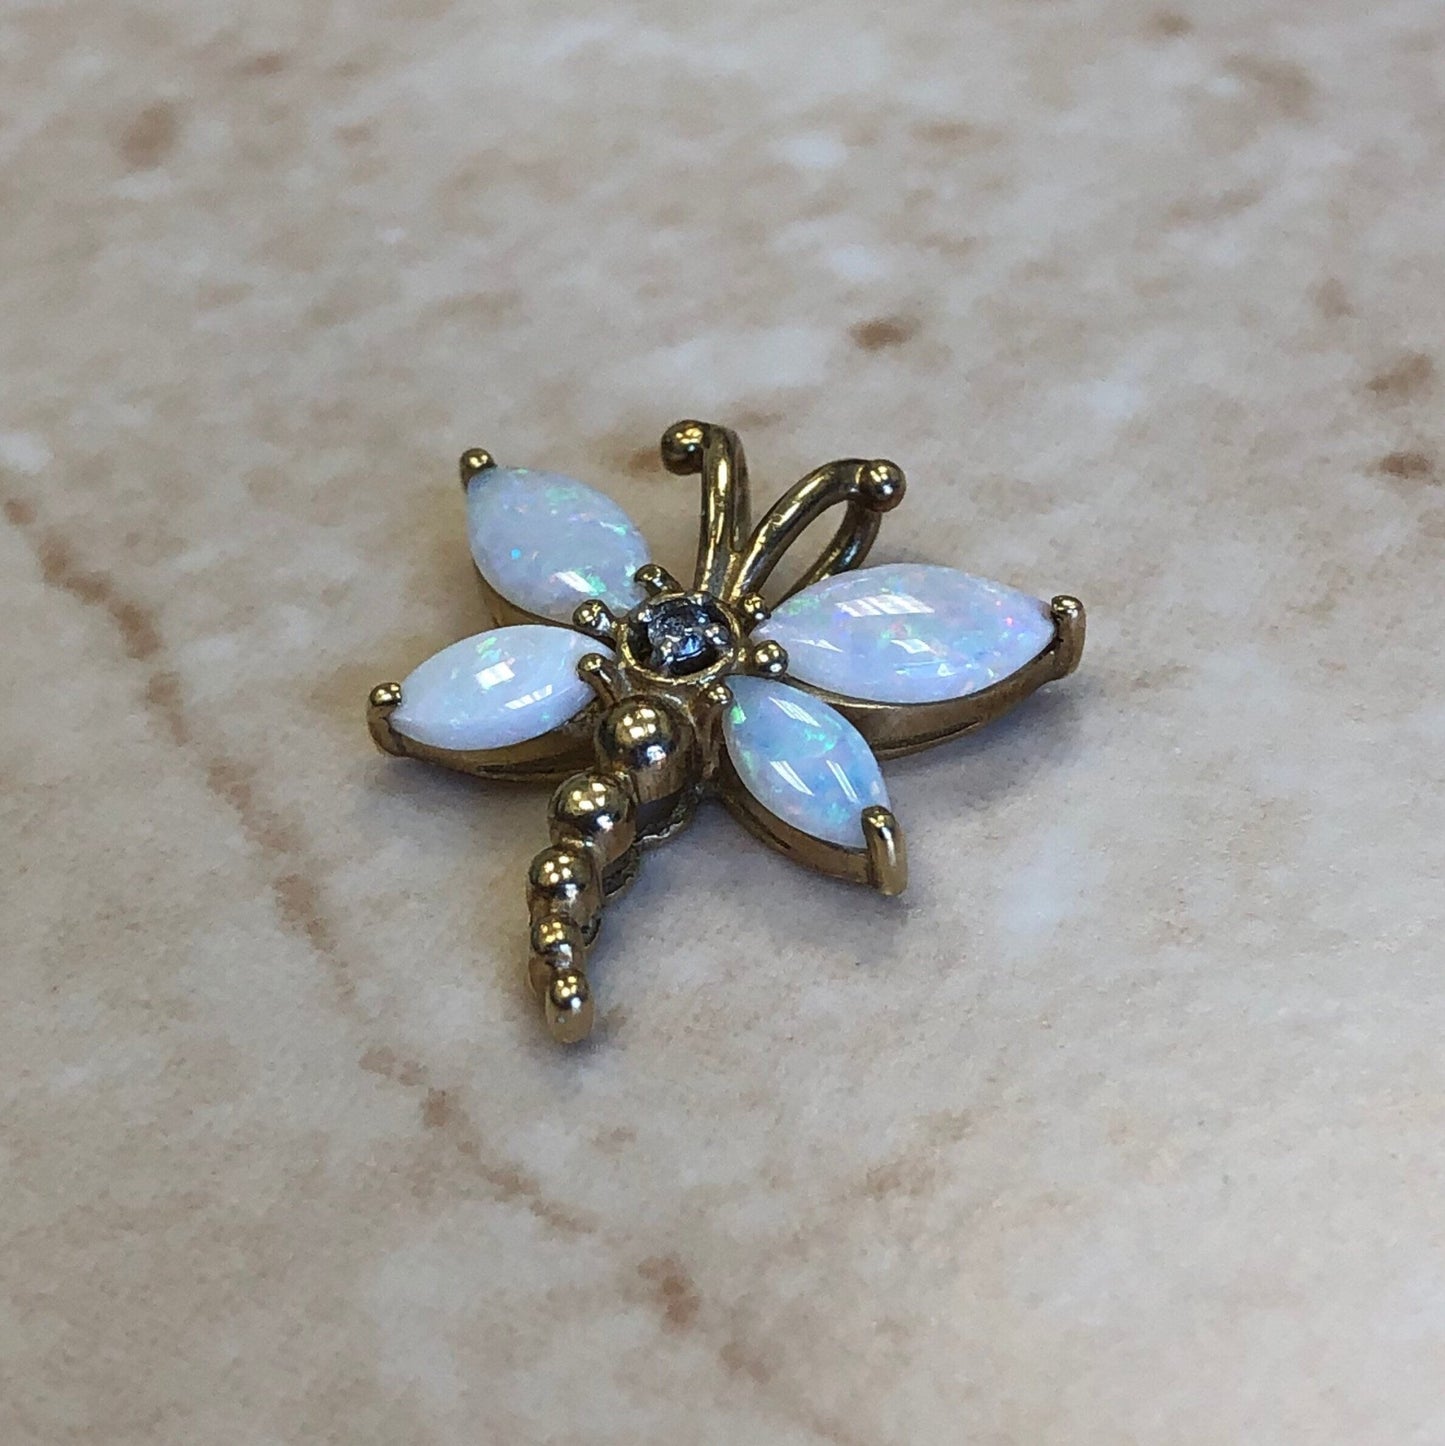 Natural Opal & Diamond Pendant Necklace - Dragonfly Pendant - 10K Yellow Gold - October Birthstone - Birthday Gift